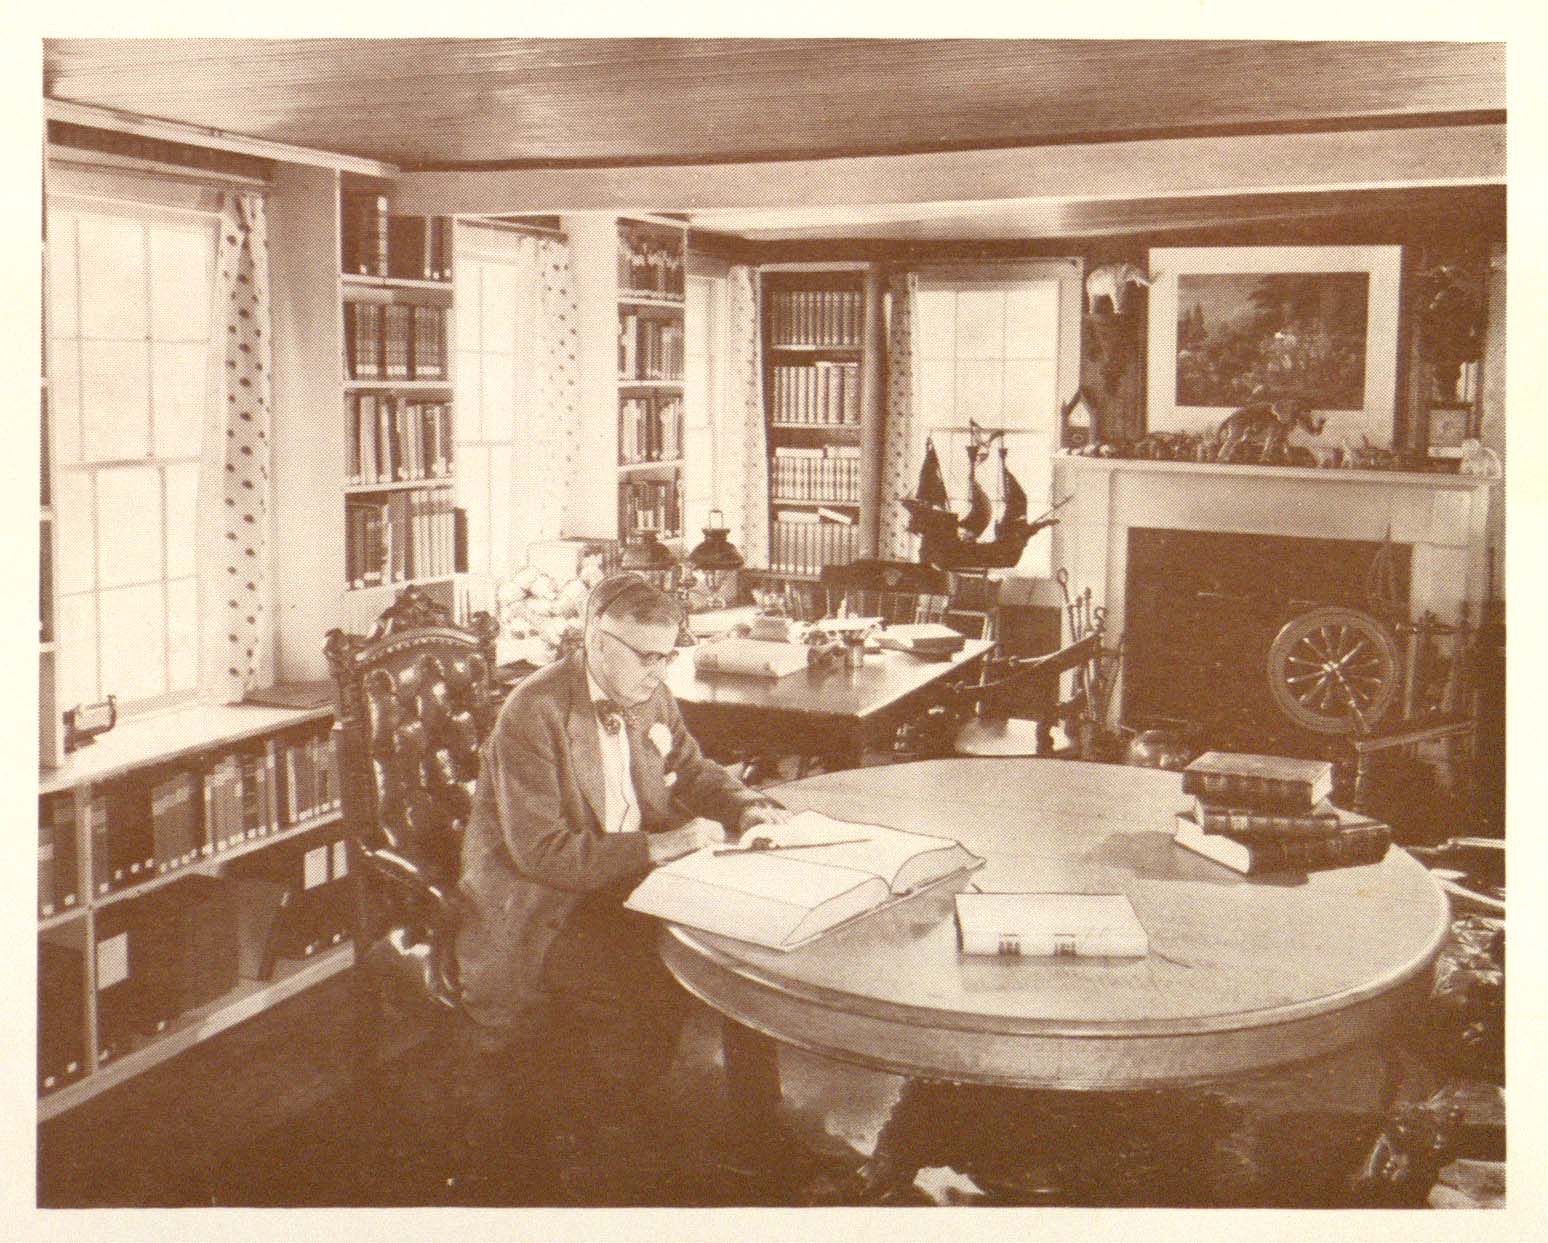 Photograph of McKew Parr reading at a table in his library